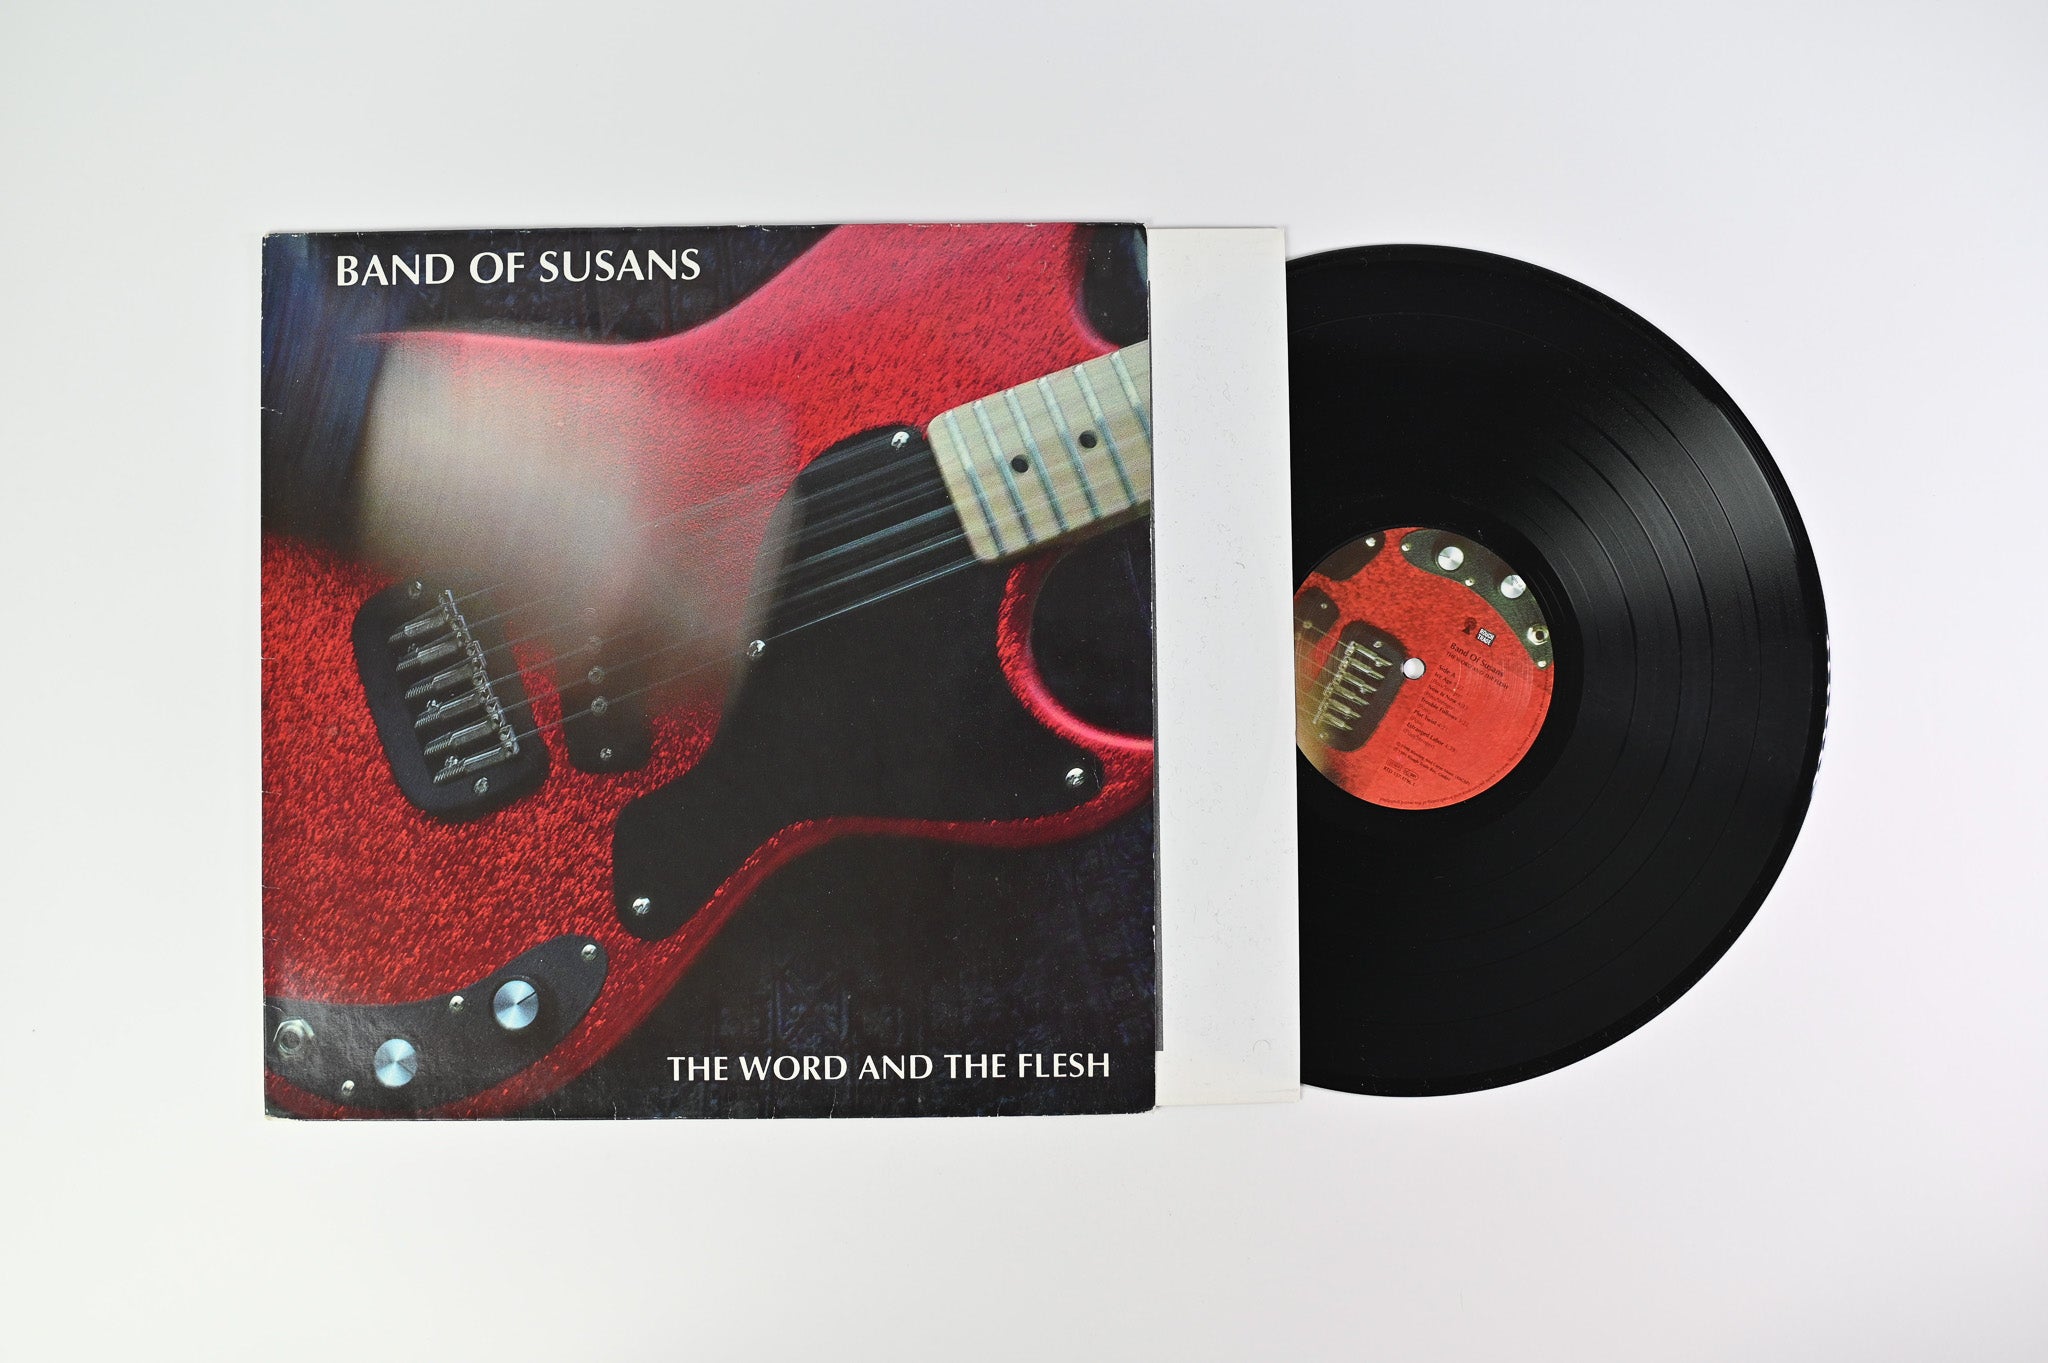 Band Of Susans - The Word And The Flesh on Rough Trade